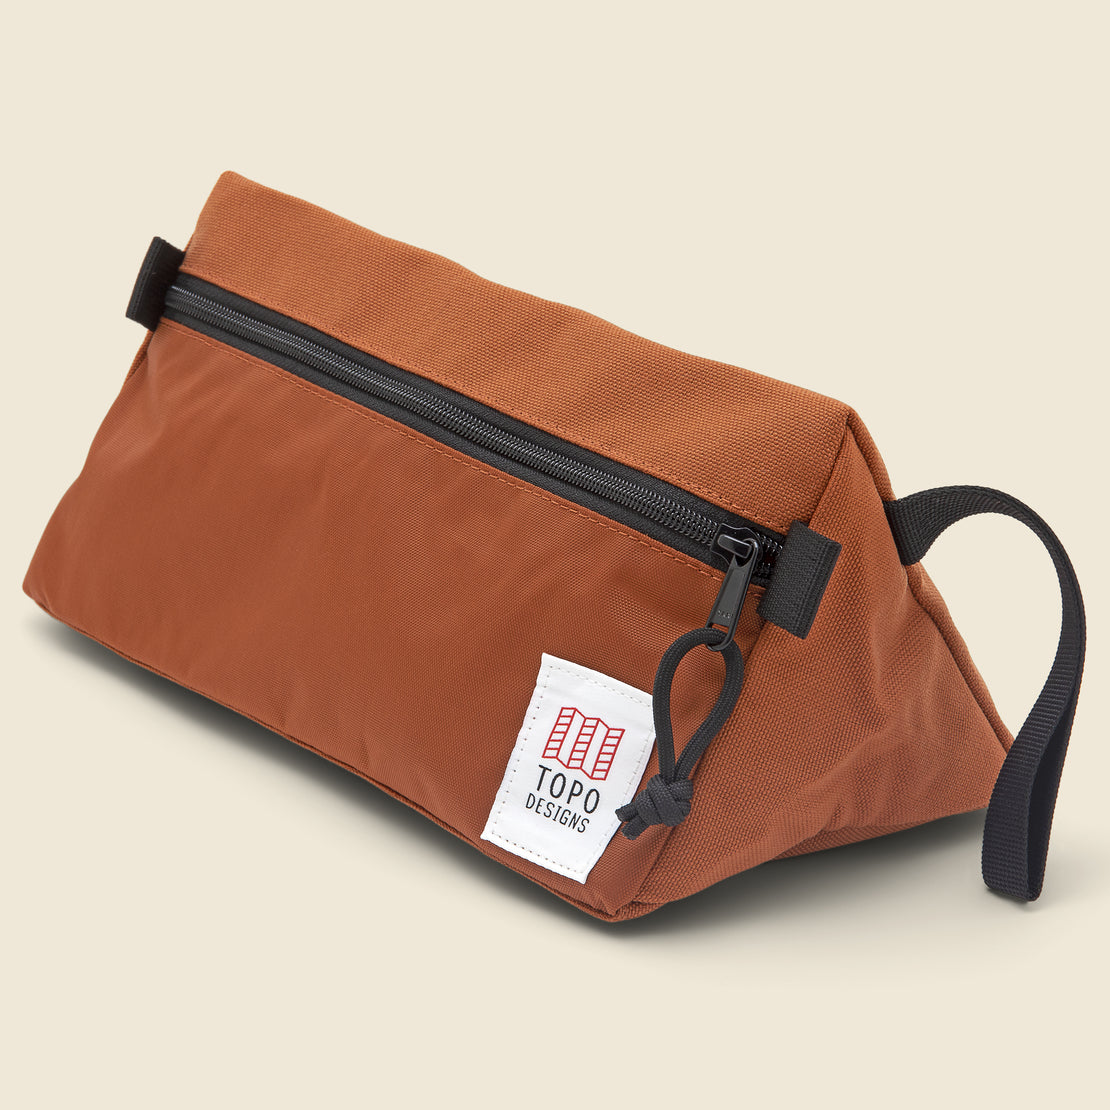 Dopp Kit - Clay - Topo Designs - STAG Provisions - Accessories - Bags / Luggage